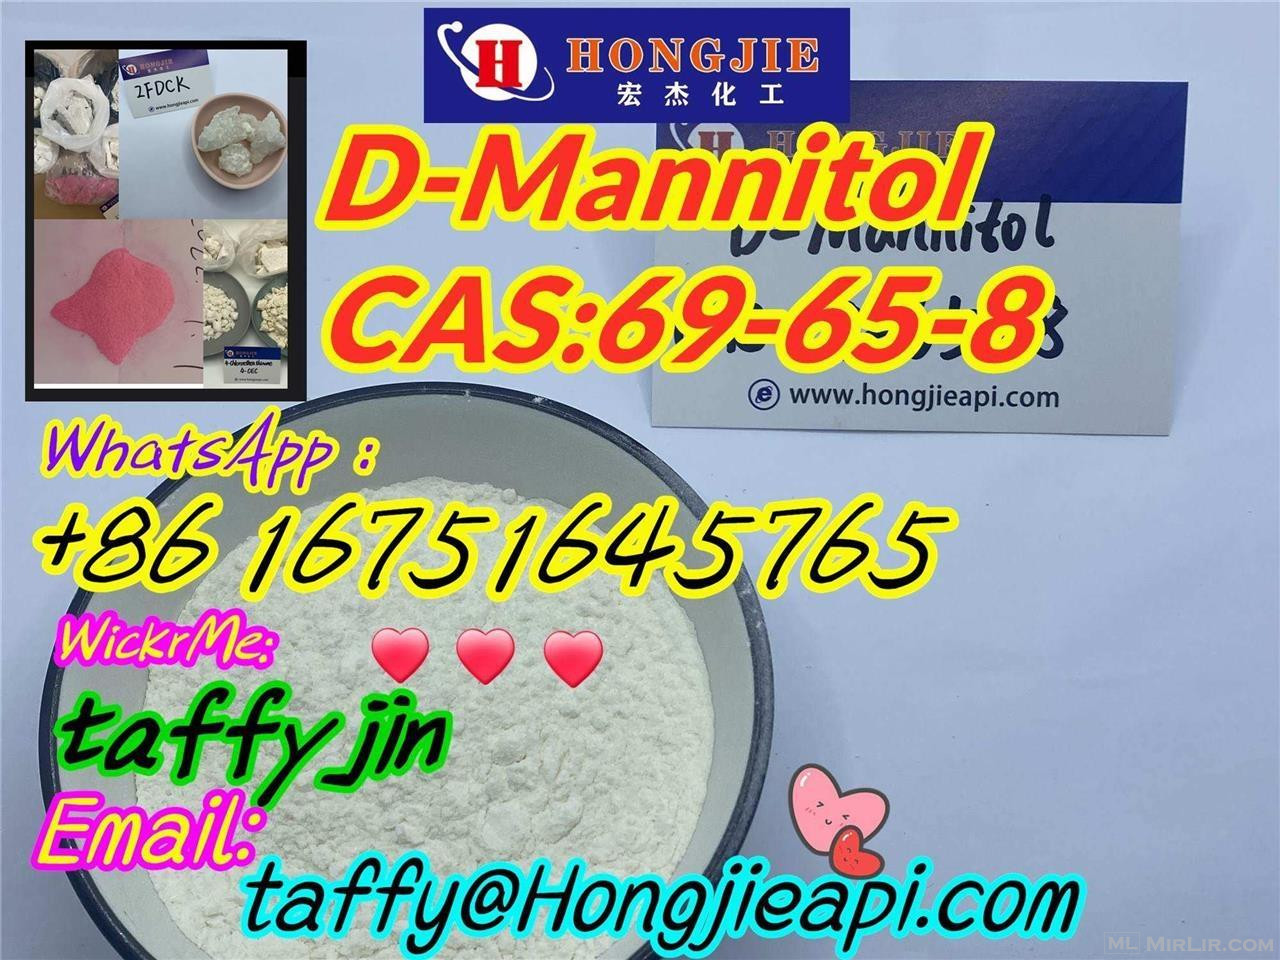 69-65-8,D-Mannitol Tap my phone number，search on Google，you 